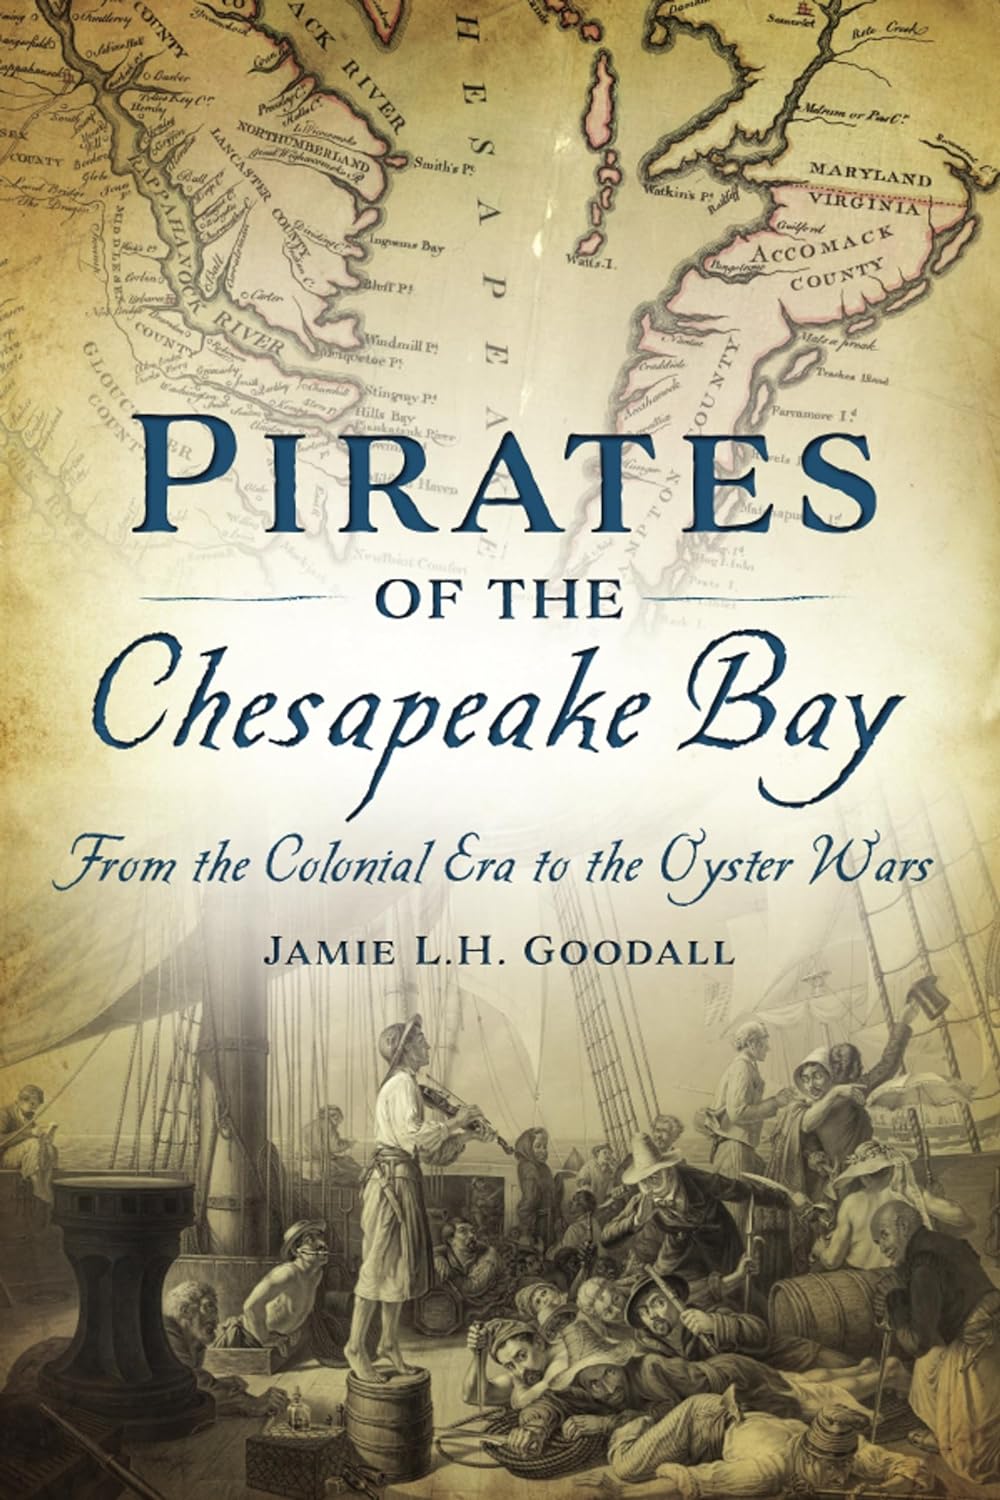 Image for "Pirates of the Chesapeake Bay: From the Colonial Era to the Oyster Wars"